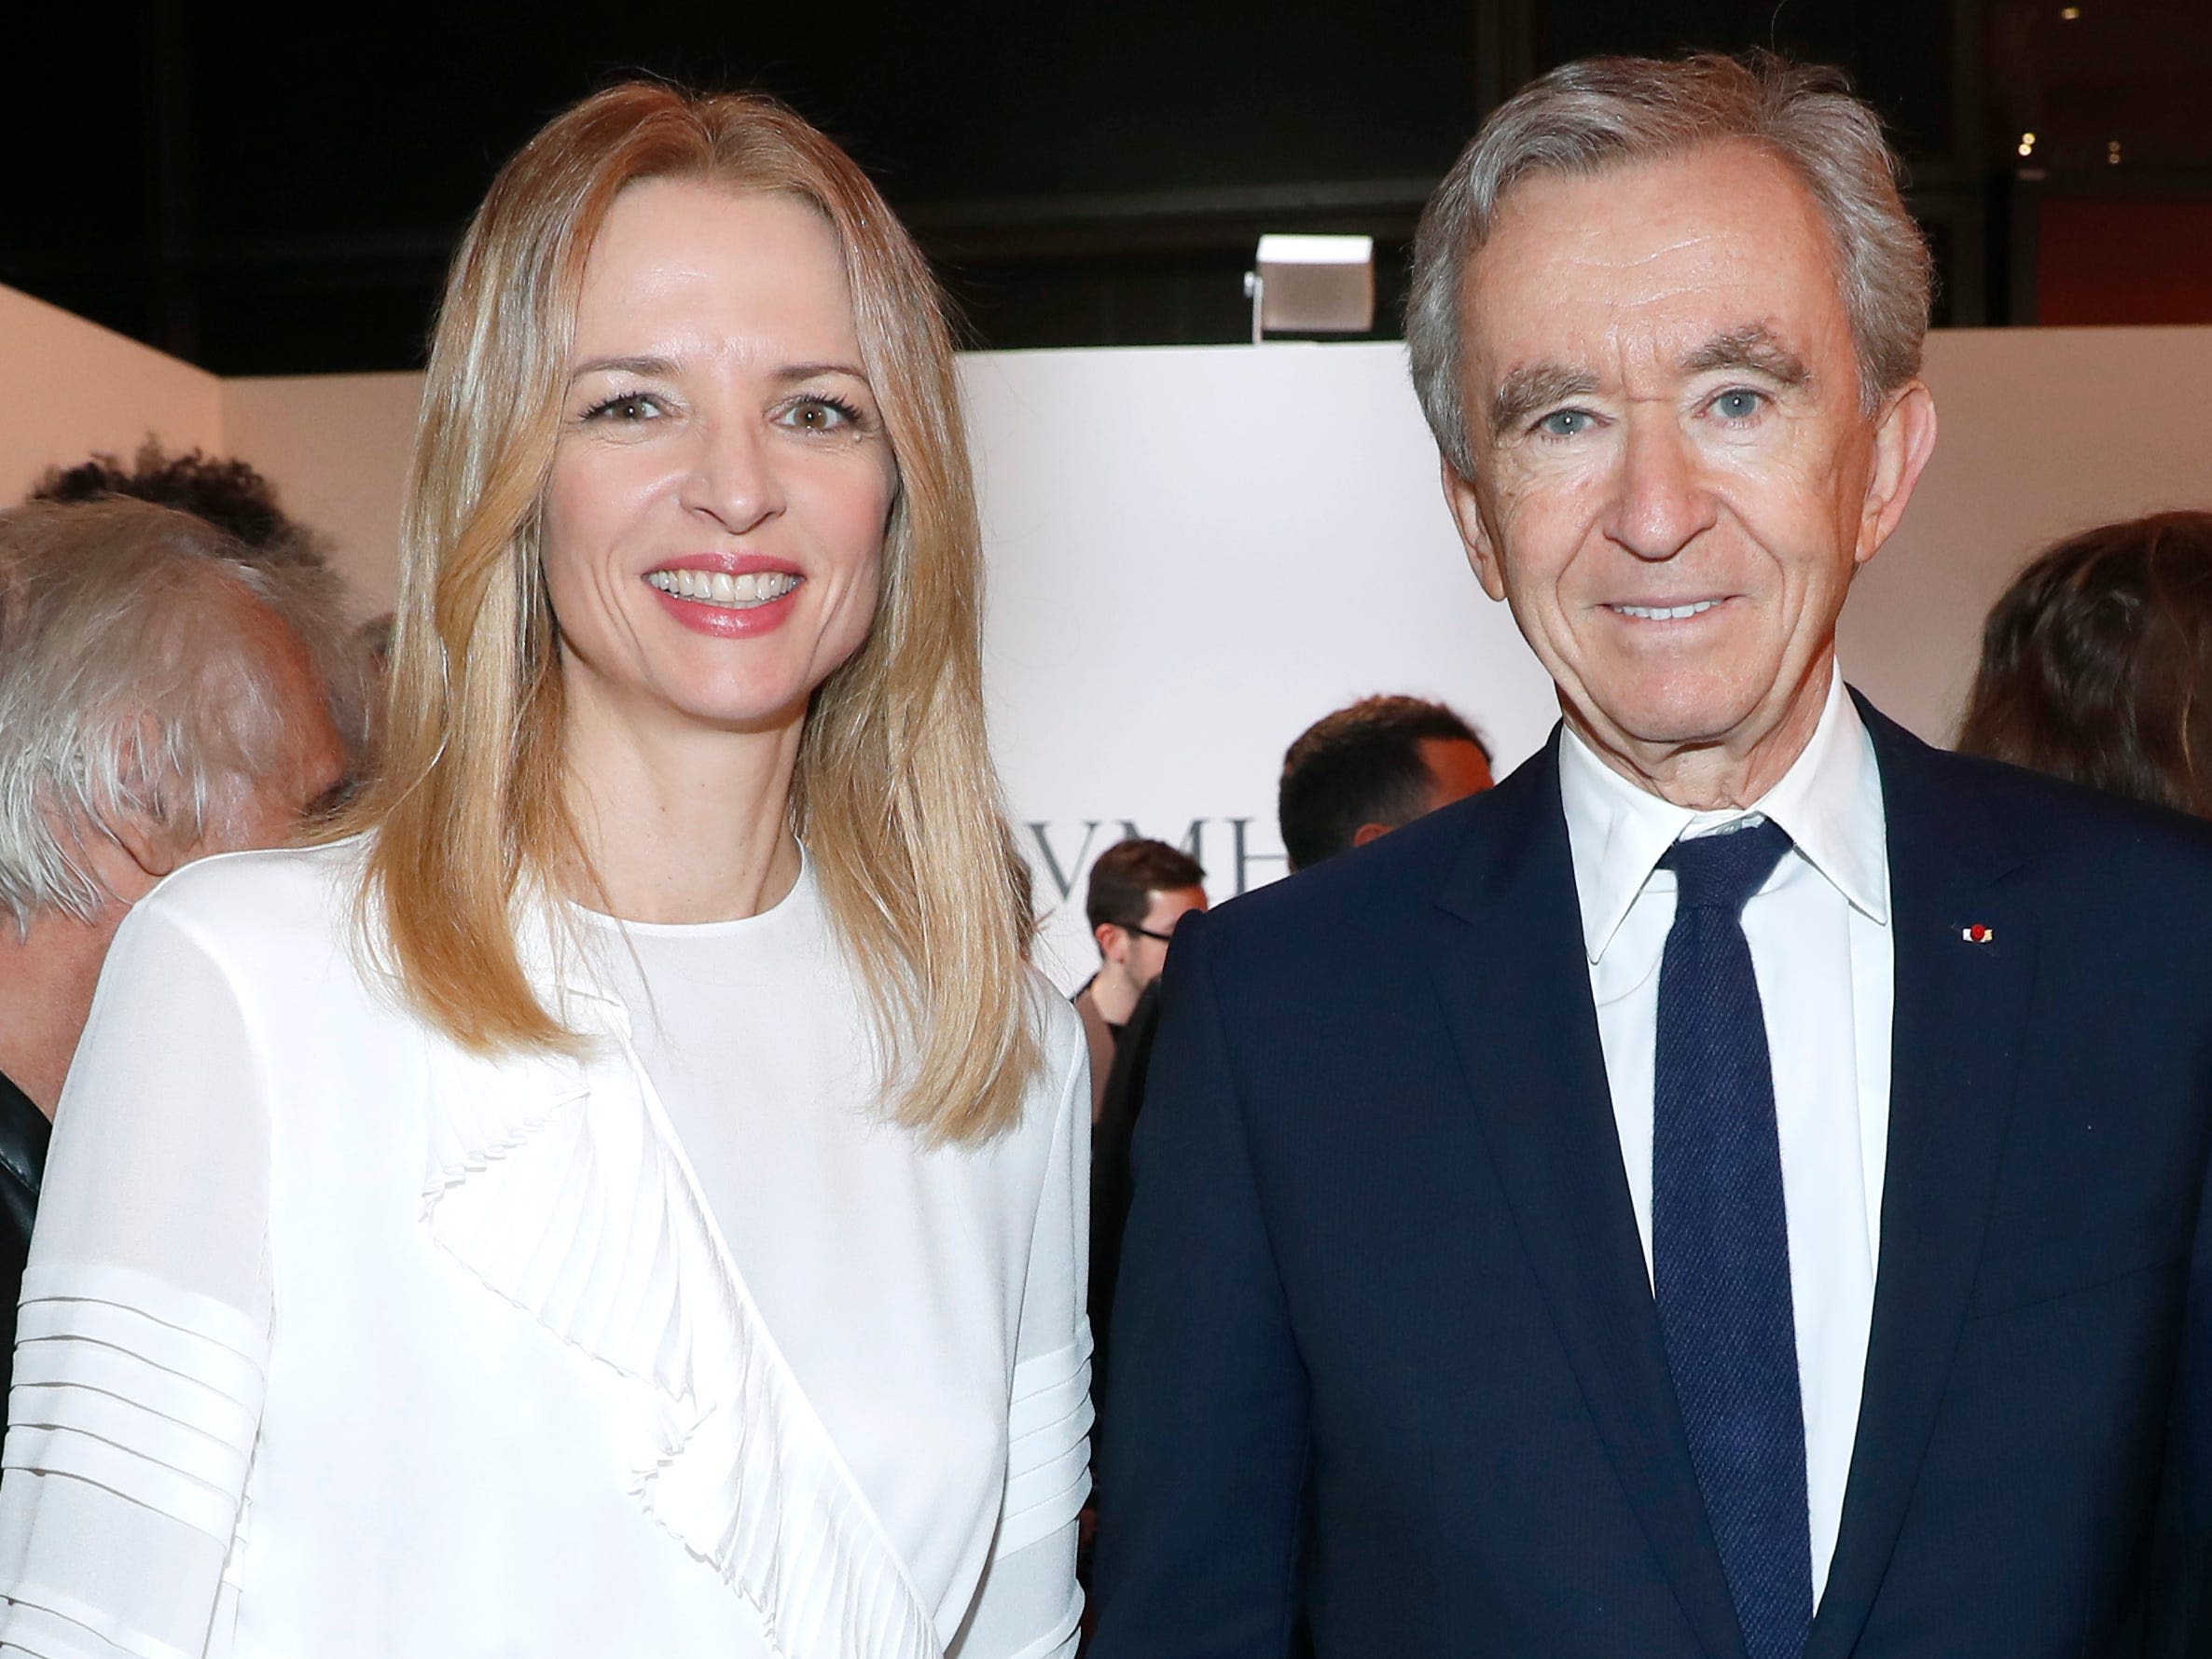 Luxury tycoon Bernard Arnault just put one of his sons in charge of an LVMH holding company